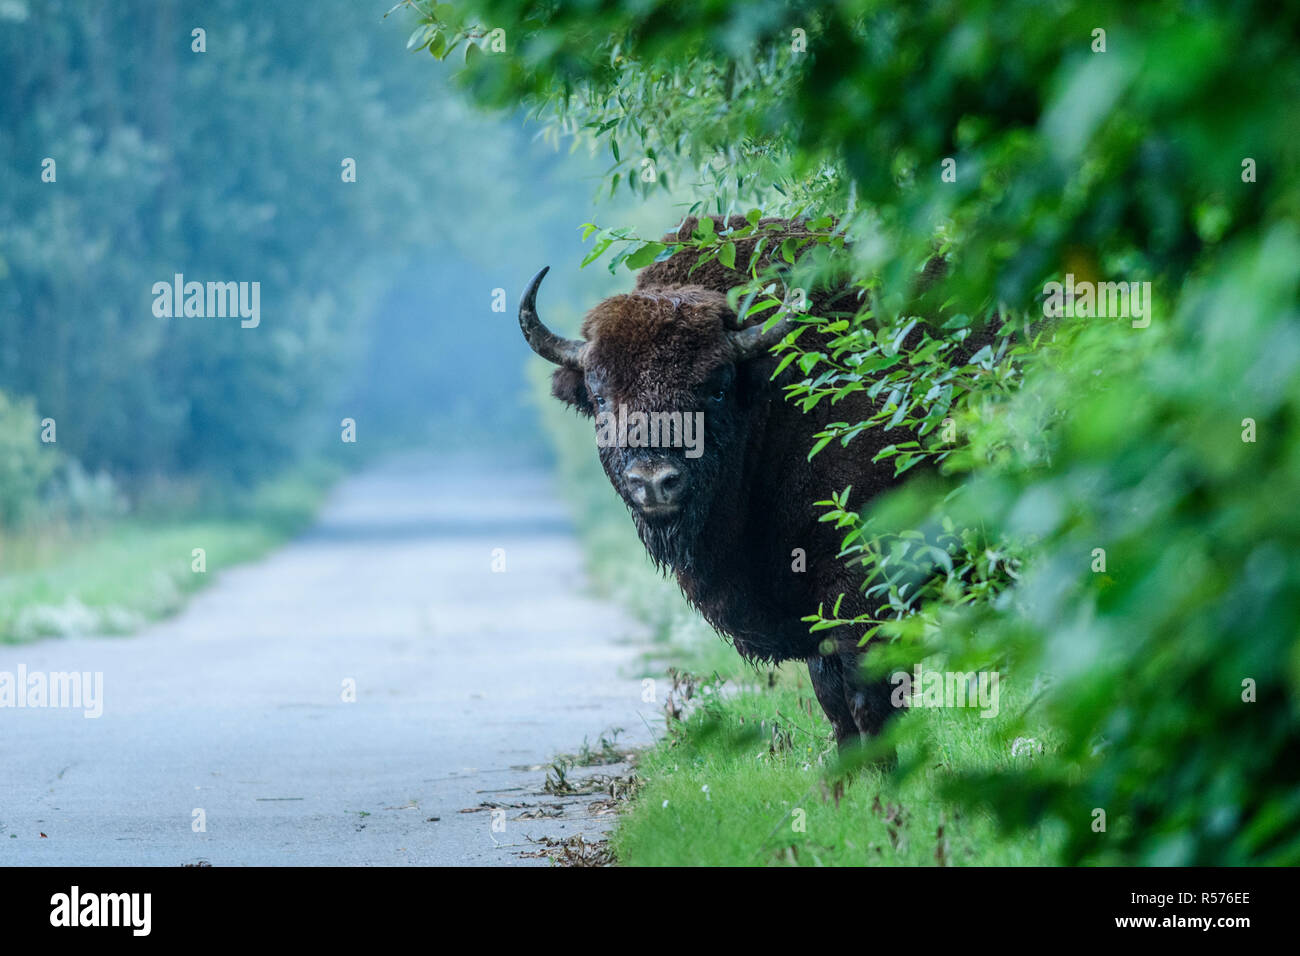 Male European bison (Bison bonasus) just before crossing a road in Bialowieza National Park, Poland. July, 2017. Stock Photo